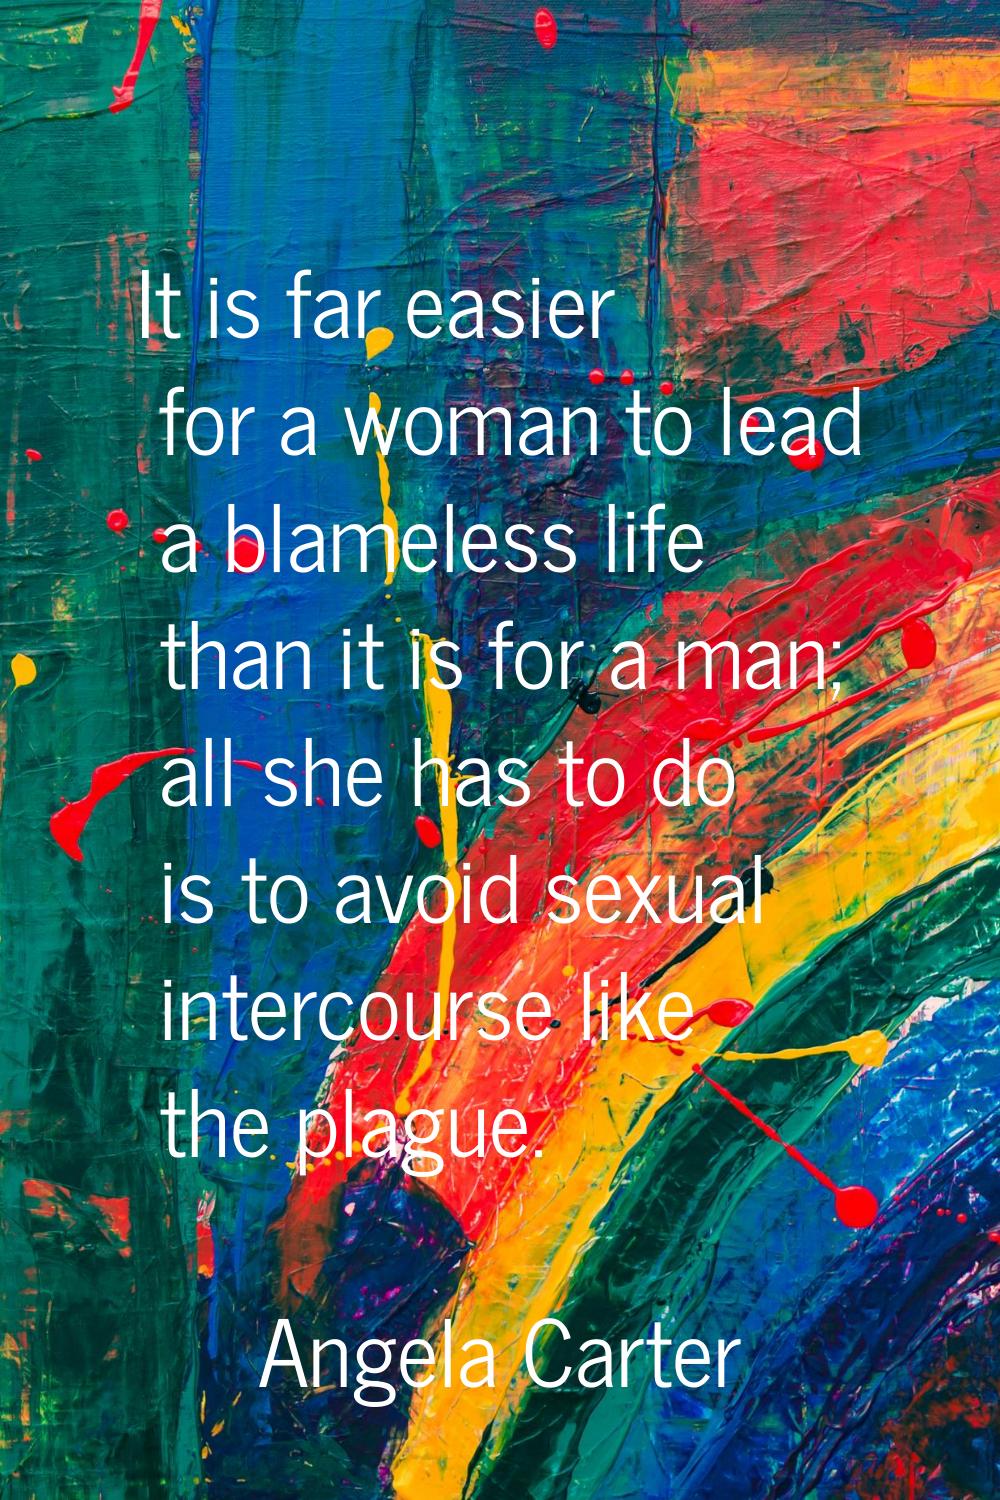 It is far easier for a woman to lead a blameless life than it is for a man; all she has to do is to